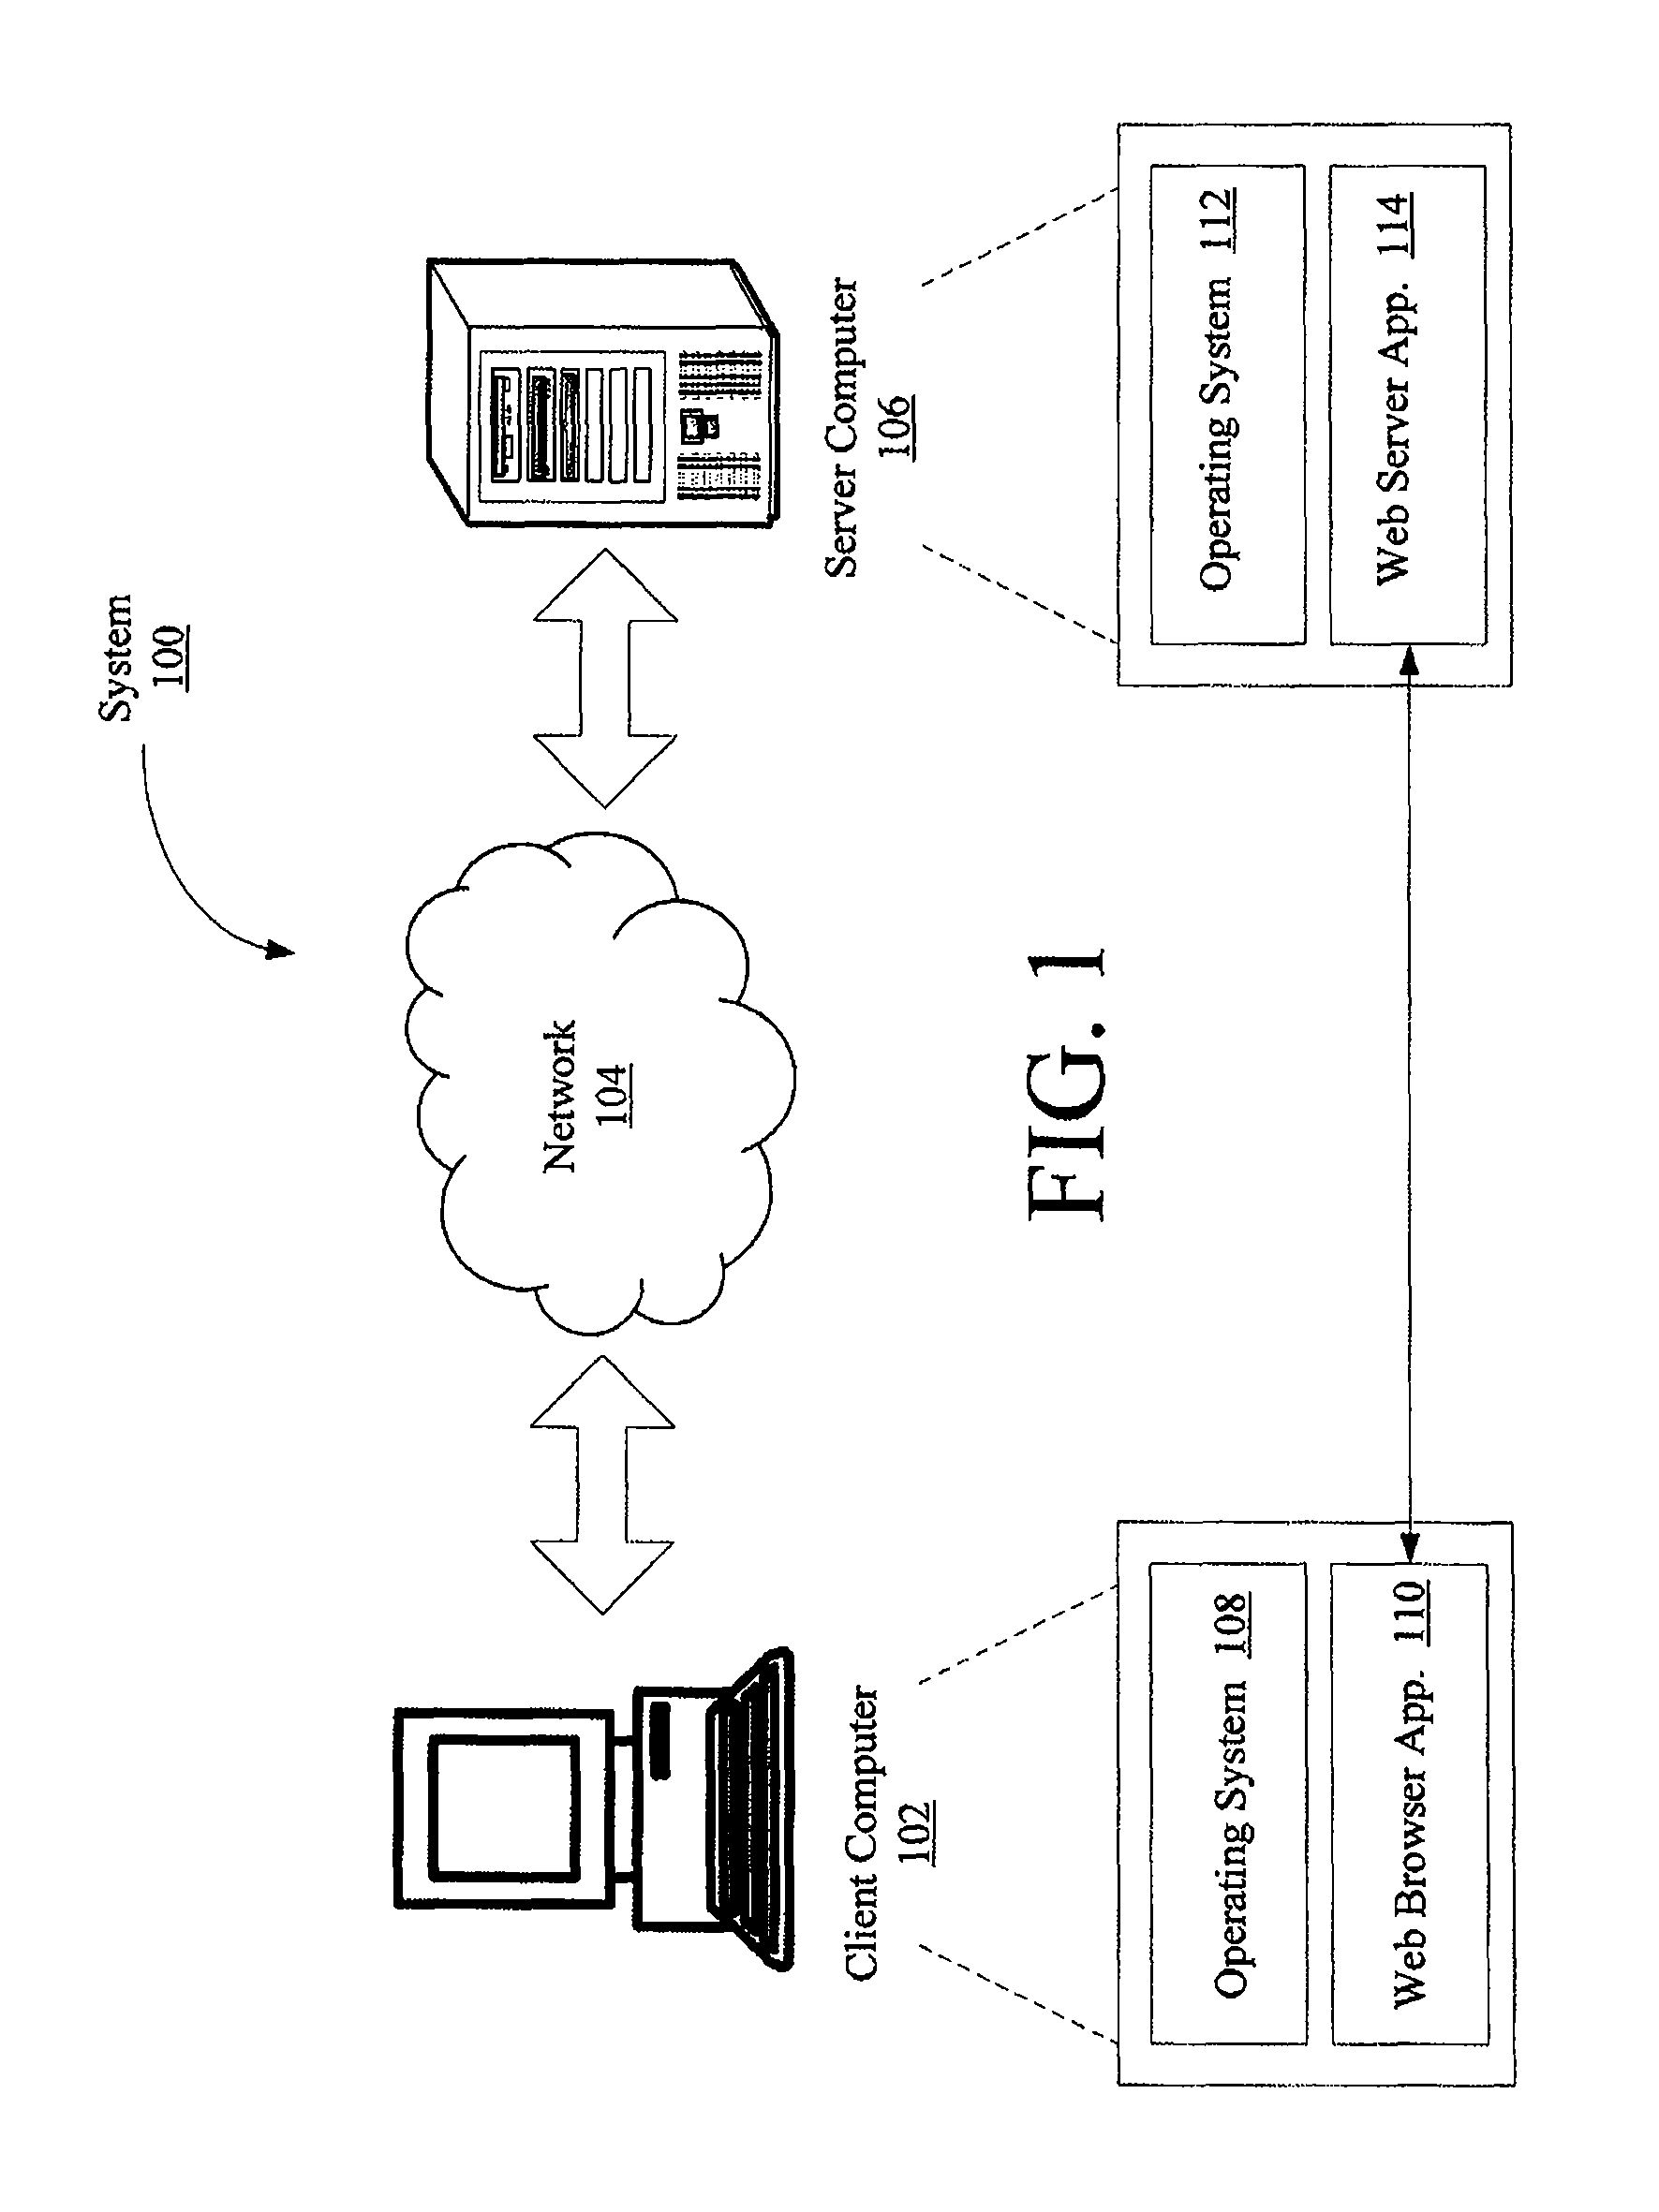 Systems and methods for protecting web based applications from cross site request forgery attacks